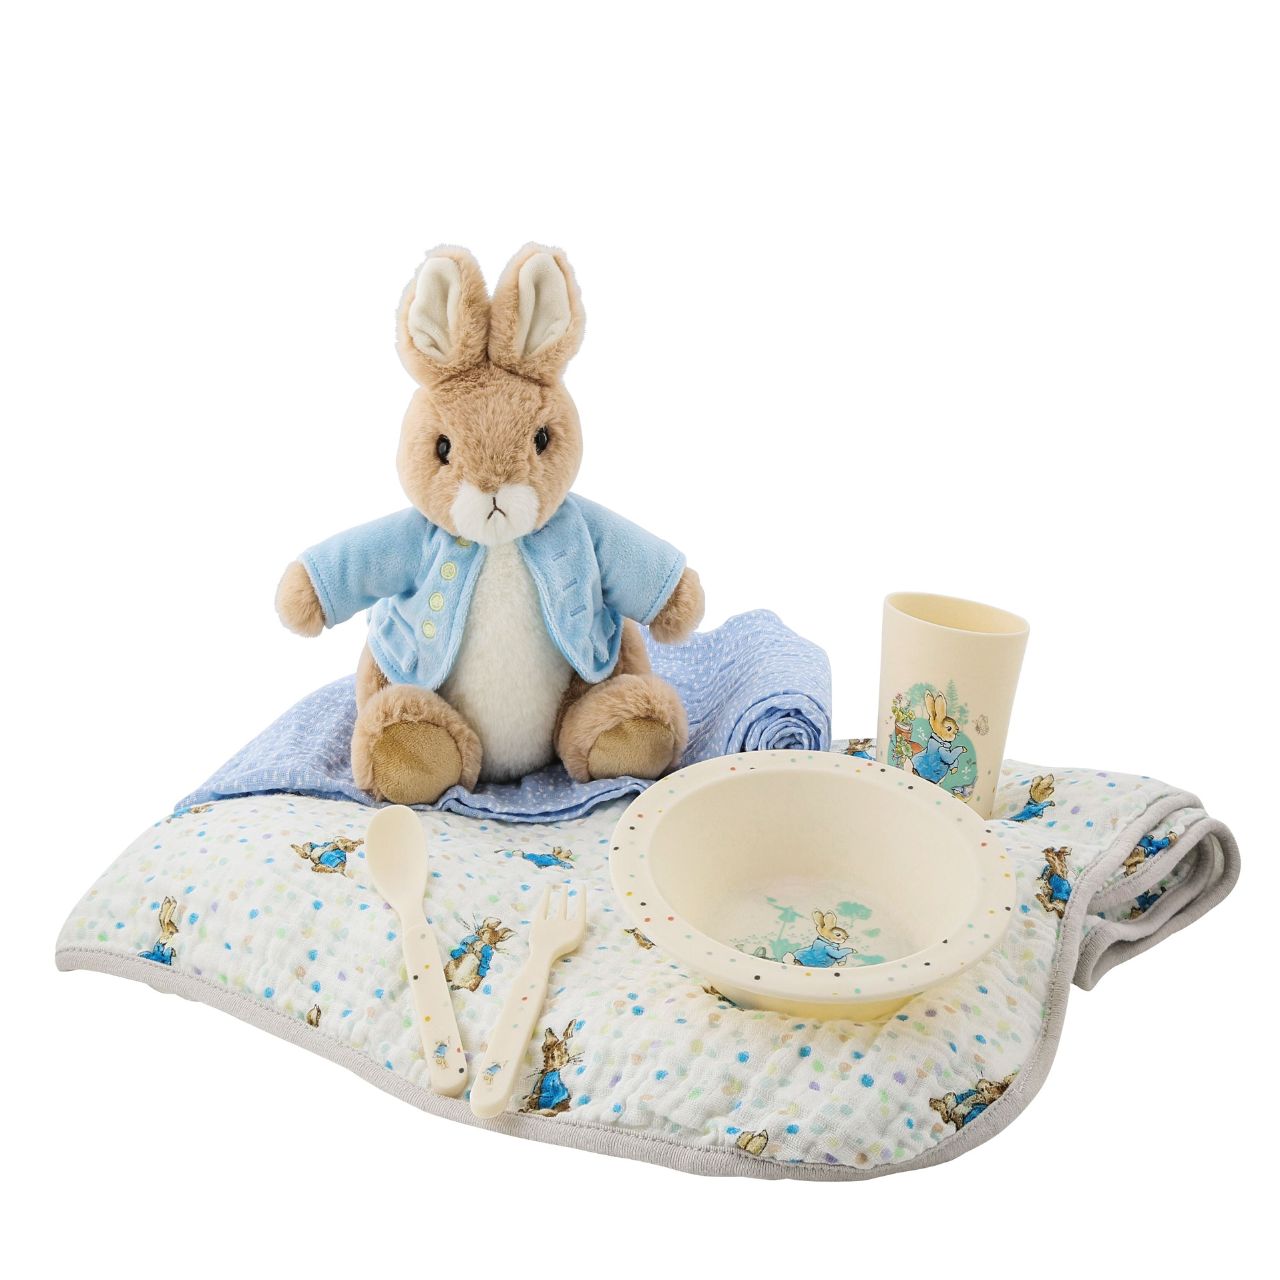 Beatrix Potter Peter Rabbit Baby Blanket  This is the dreamiest Peter Rabbit blanket you ever did see. Made from layers of luxurious 100% cotton, 105g/m2, giving your little one that extra layer of comfort and warmth in their crib. Presented on a branded gift box.